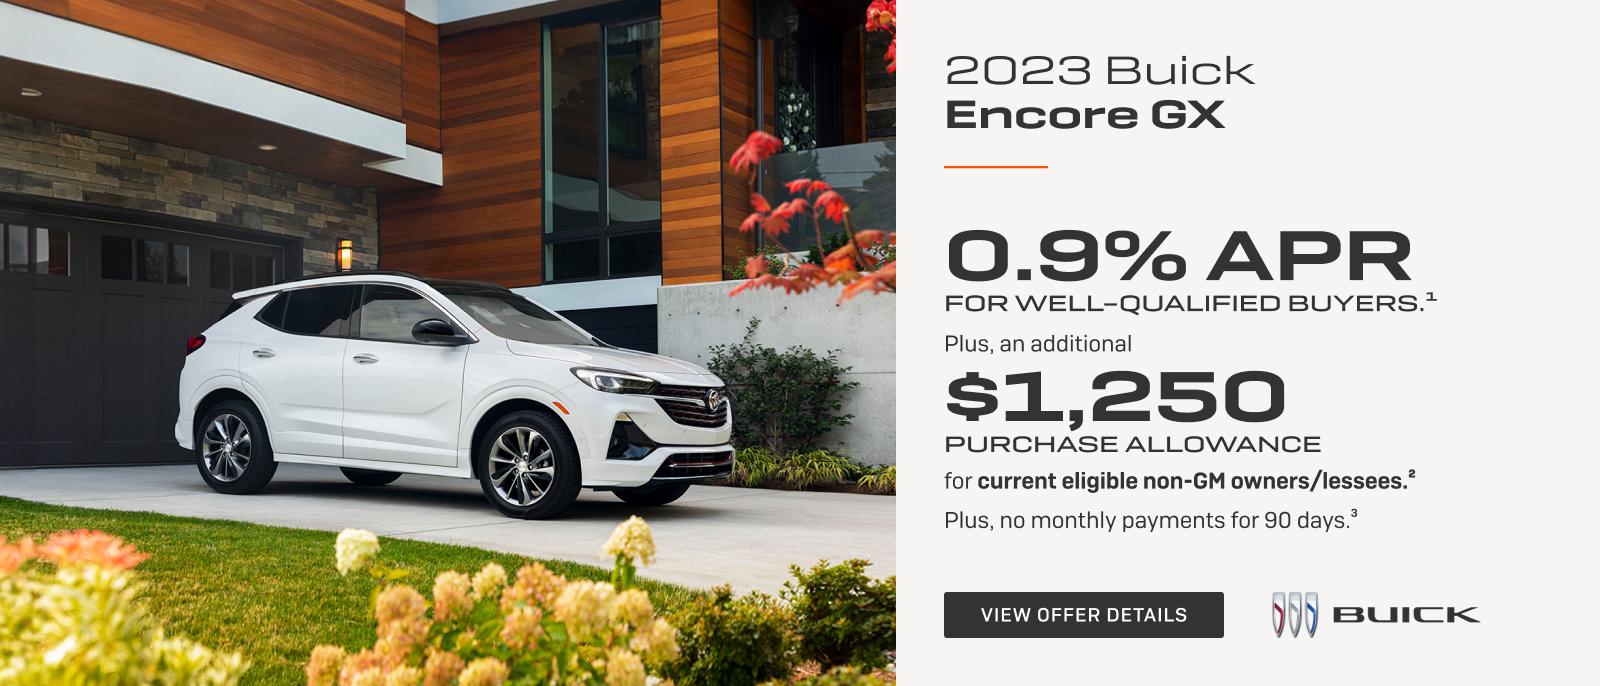 0.9% APR 
FOR WELL-QUALIFIED BUYERS.1

Plus, an additional $1,250 PURCHASE ALLOWANCE for current eligible non-GM owners/lessees.2

Plus, no monthly payments for 90 days.3